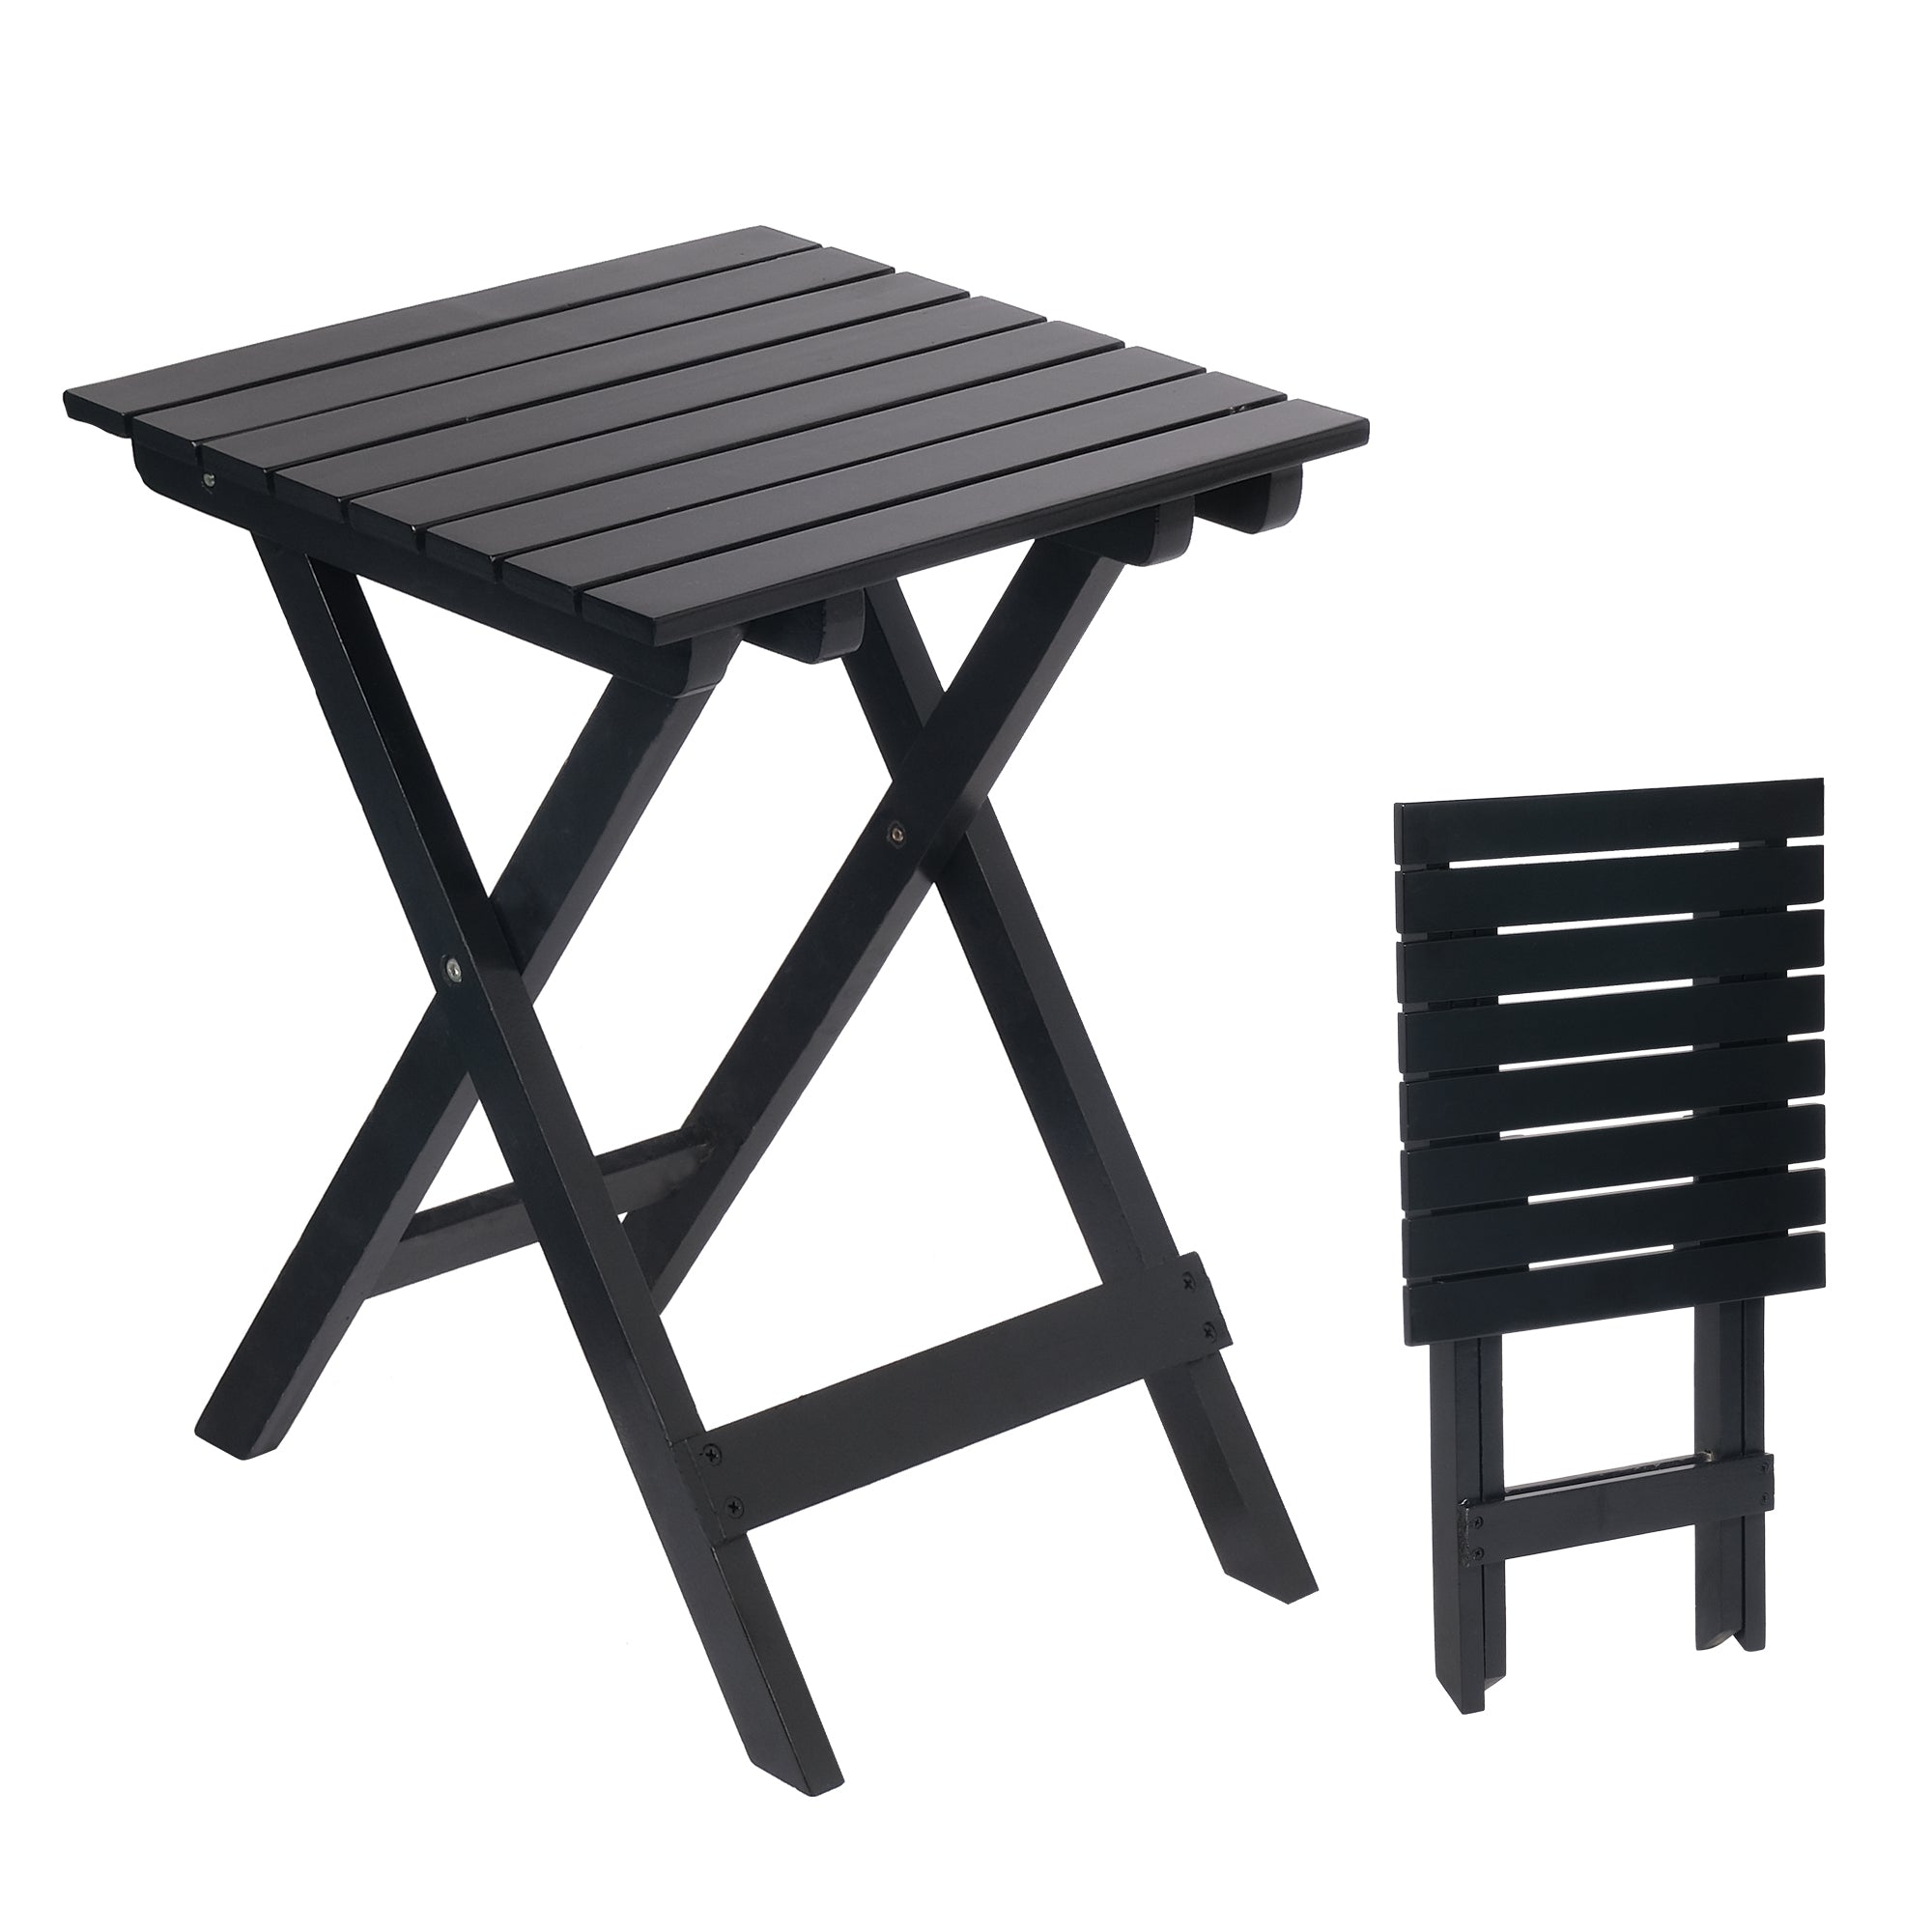 13.7" Square Outdoor Patio Folding Side Table Wood Portable End Table, Black